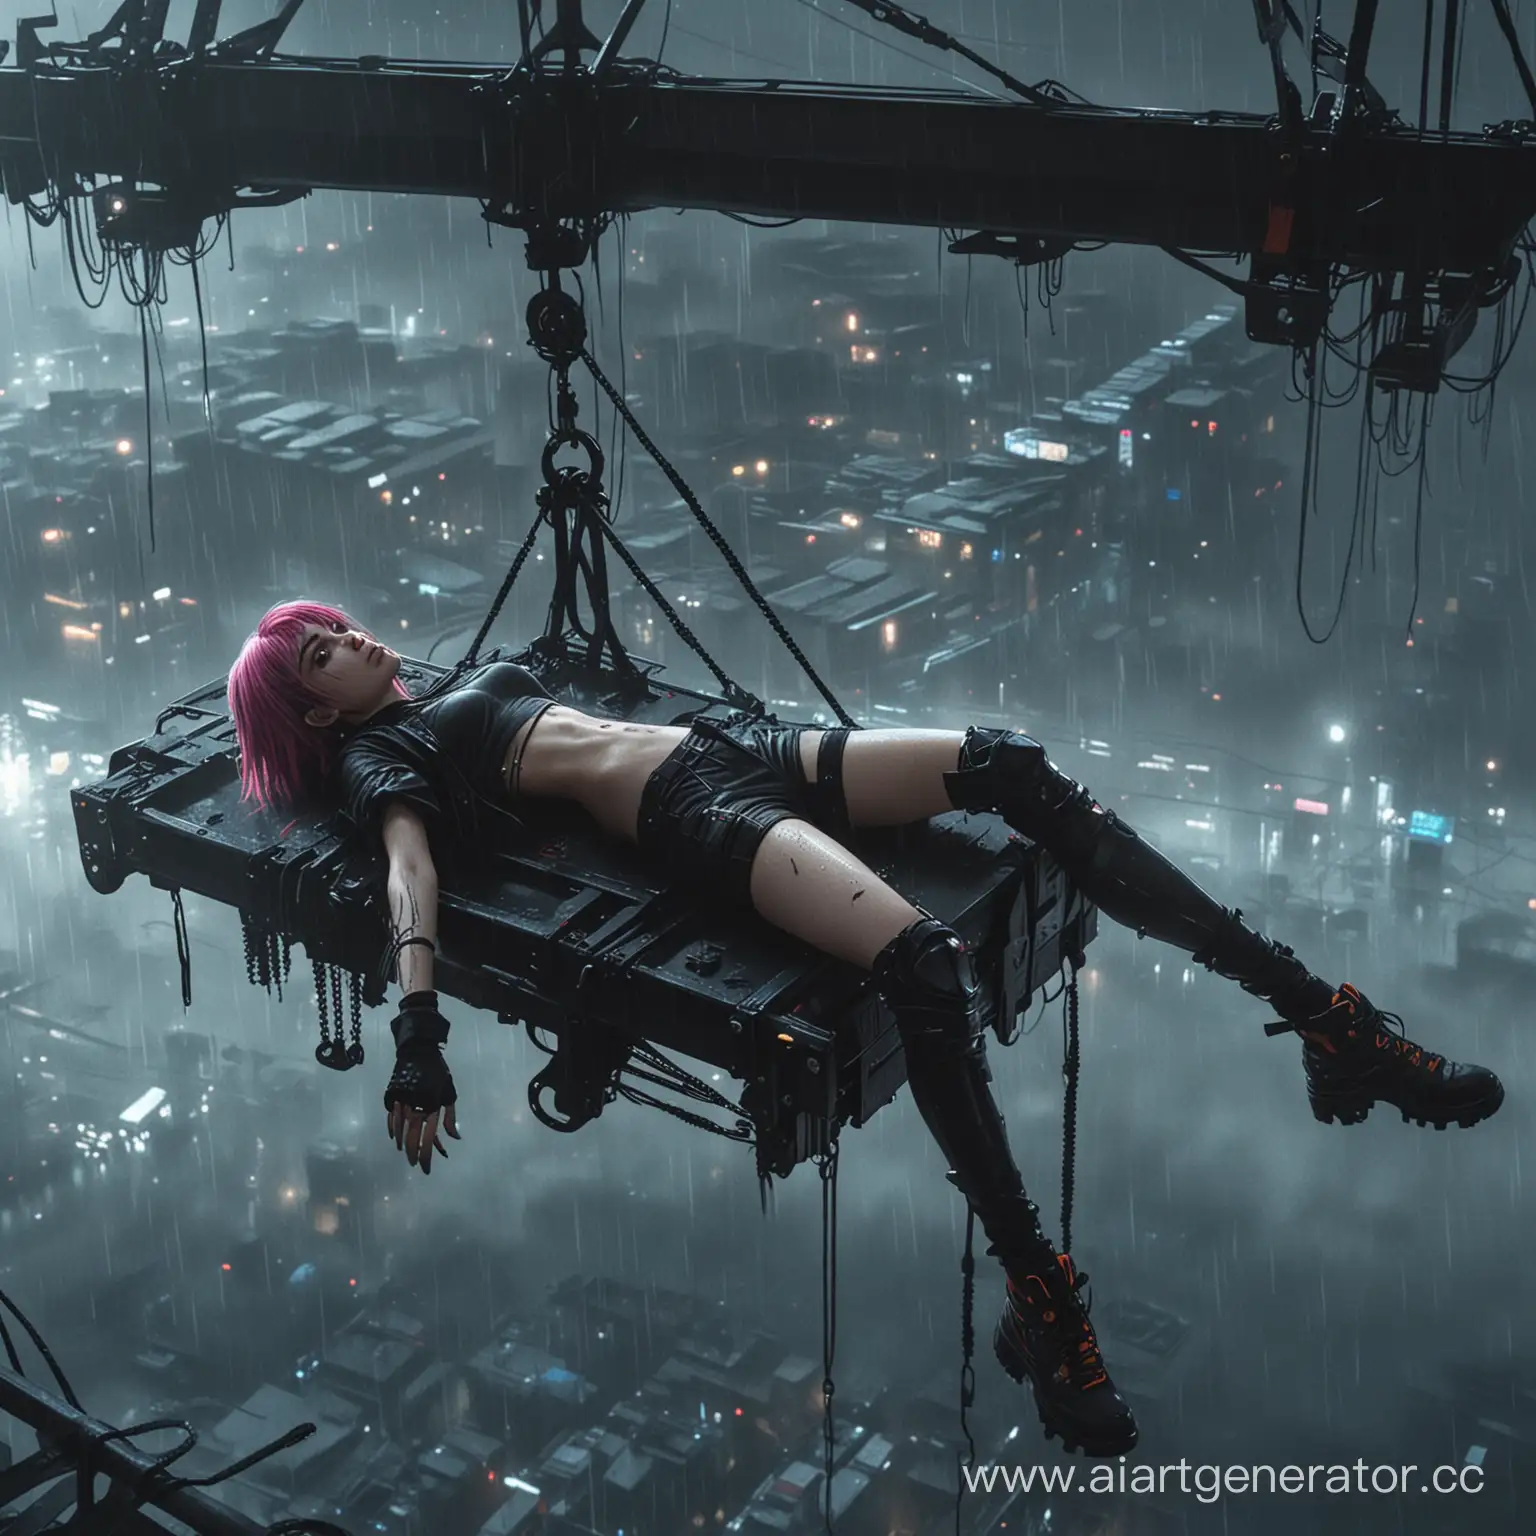 cyberpunk dark style, rain, fog, anime emo girl with detail colored hair, the girl is lying on the edge of the lifting crane, detail light and shadows, dynamic frame and the perspective from above